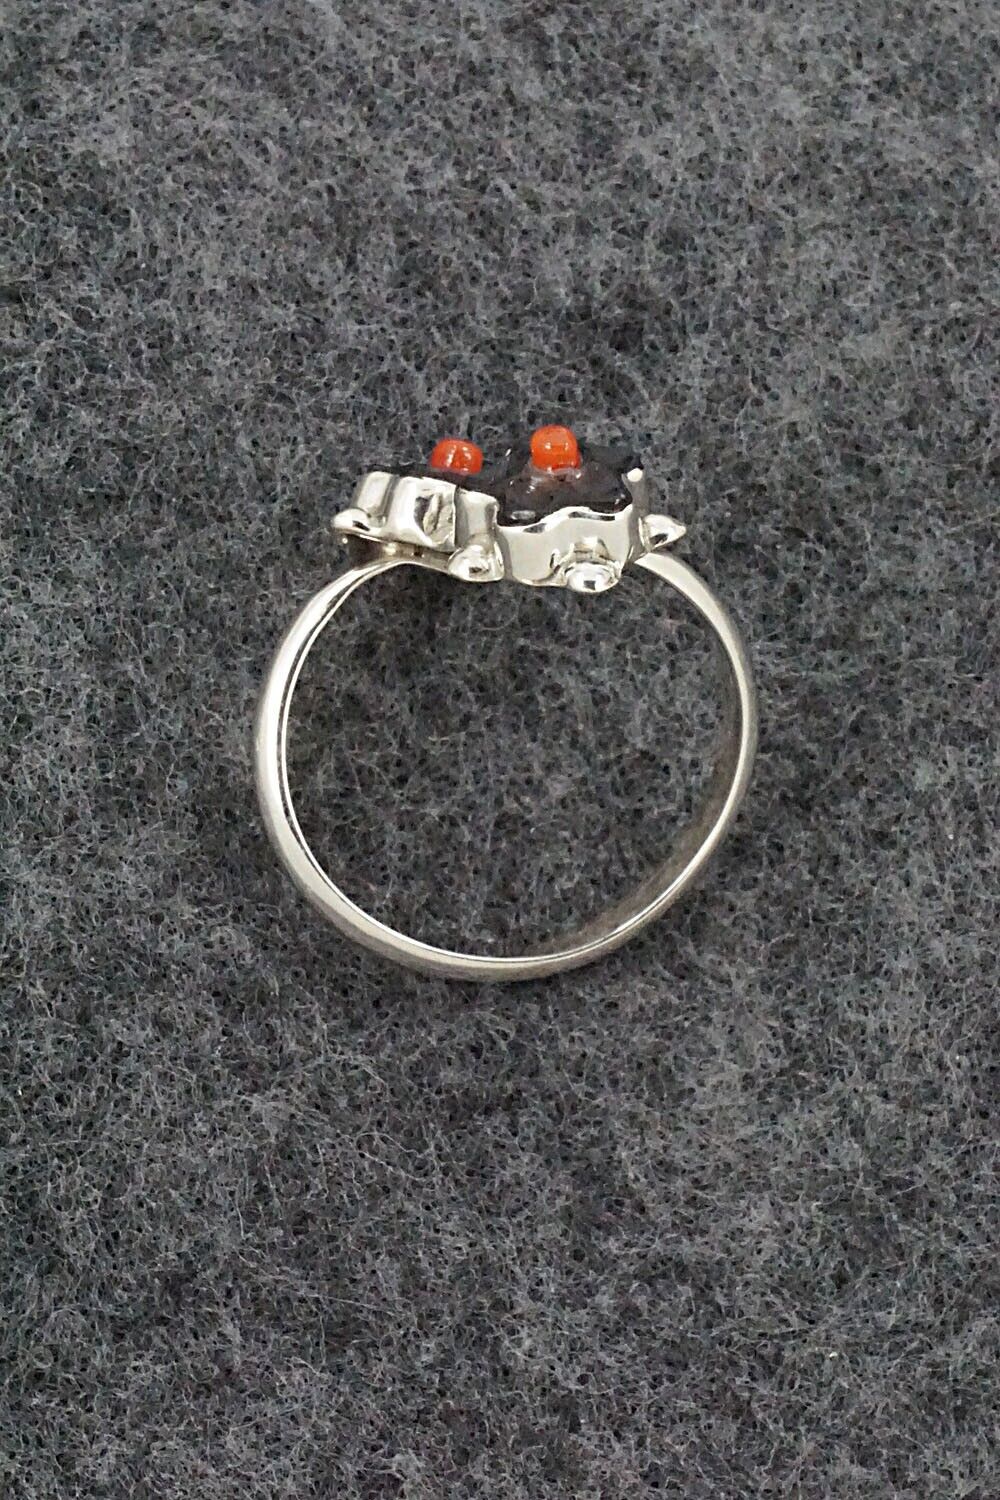 Coral, Onyx & Sterling Silver Ring - Tamara Pinto - Size 5